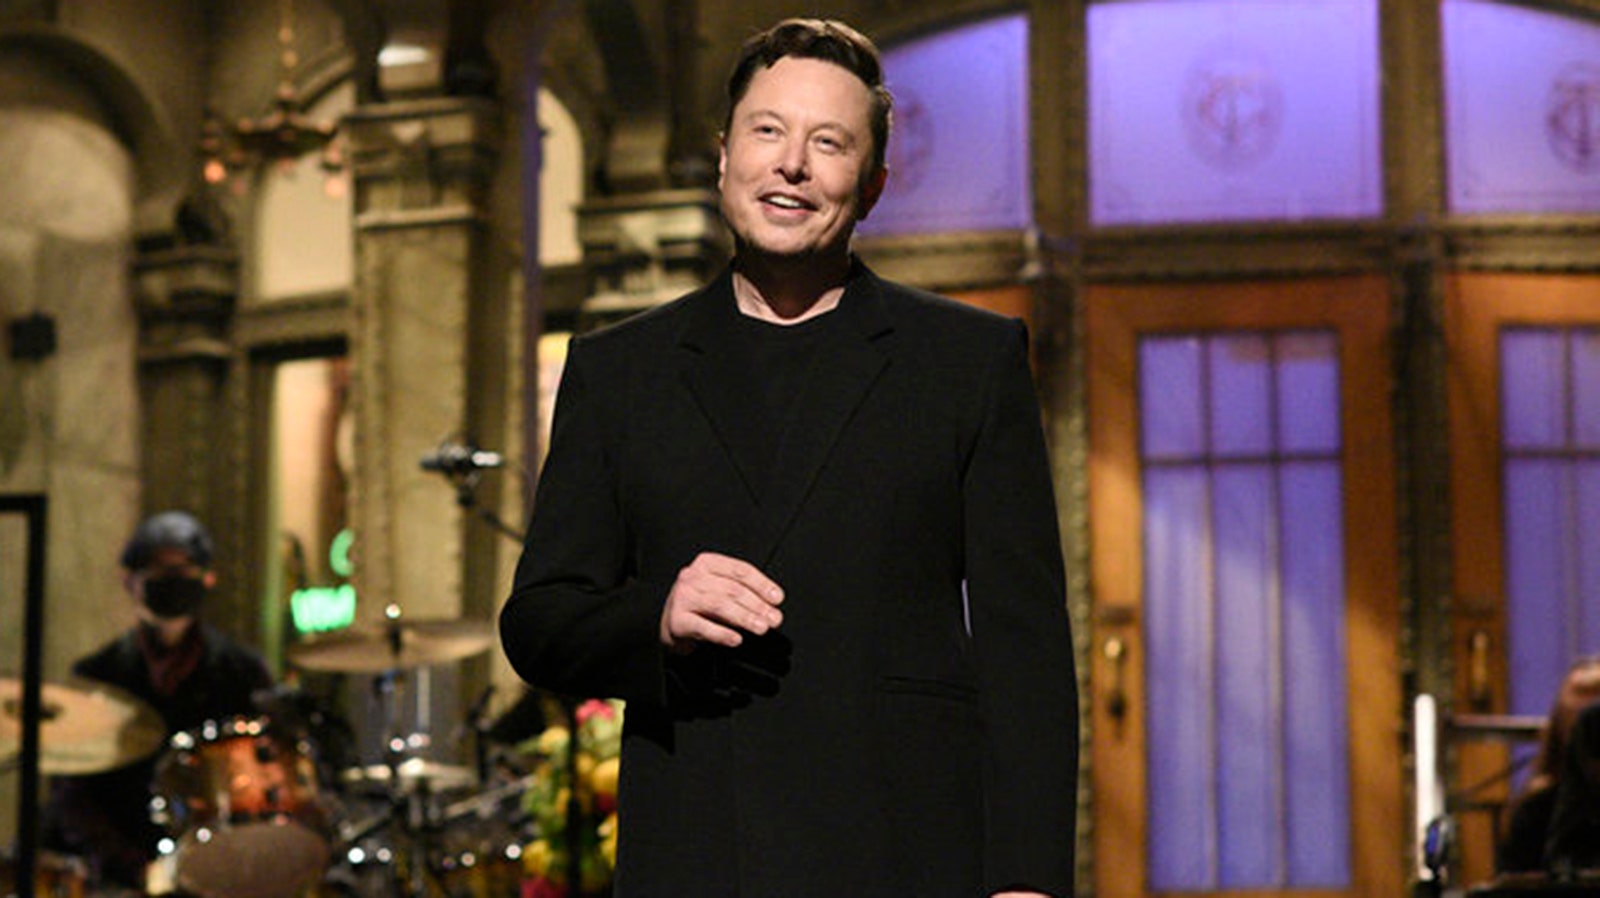 Elon Musk's 'SNL' hosting gig was a ratings hit despite controversy